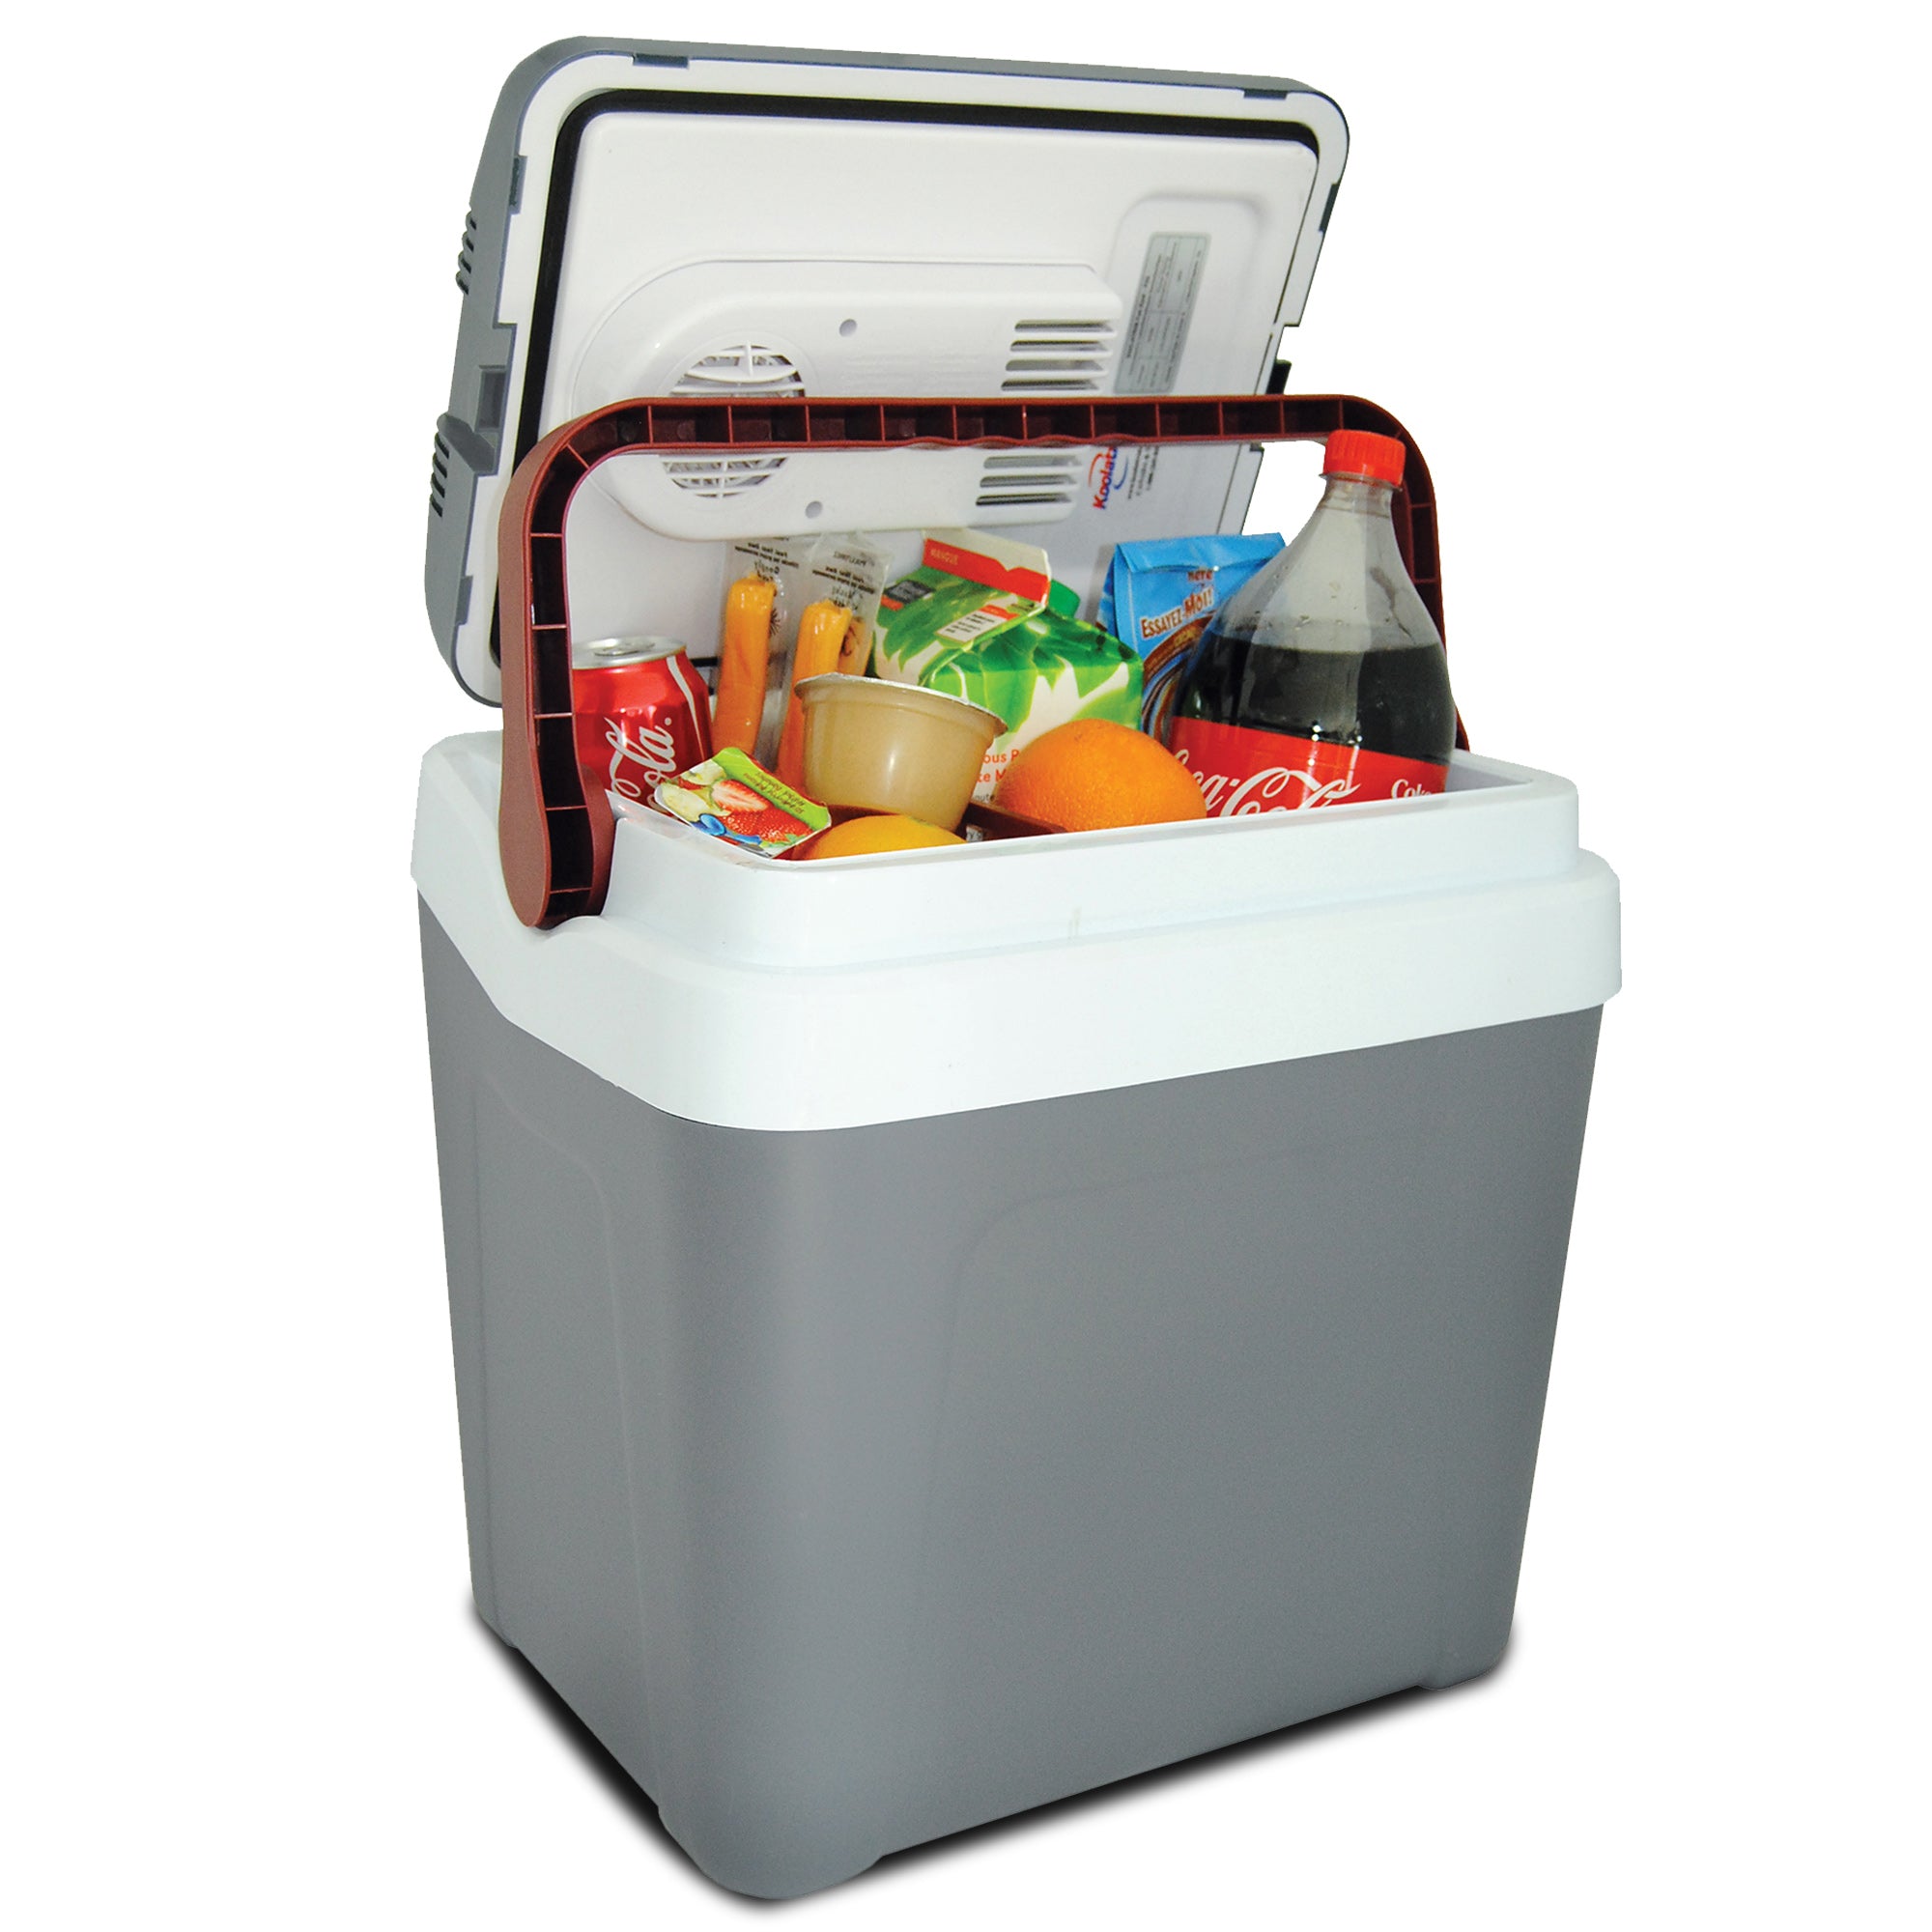 Koolatron 12V travel cooler, open with food inside, on a white background